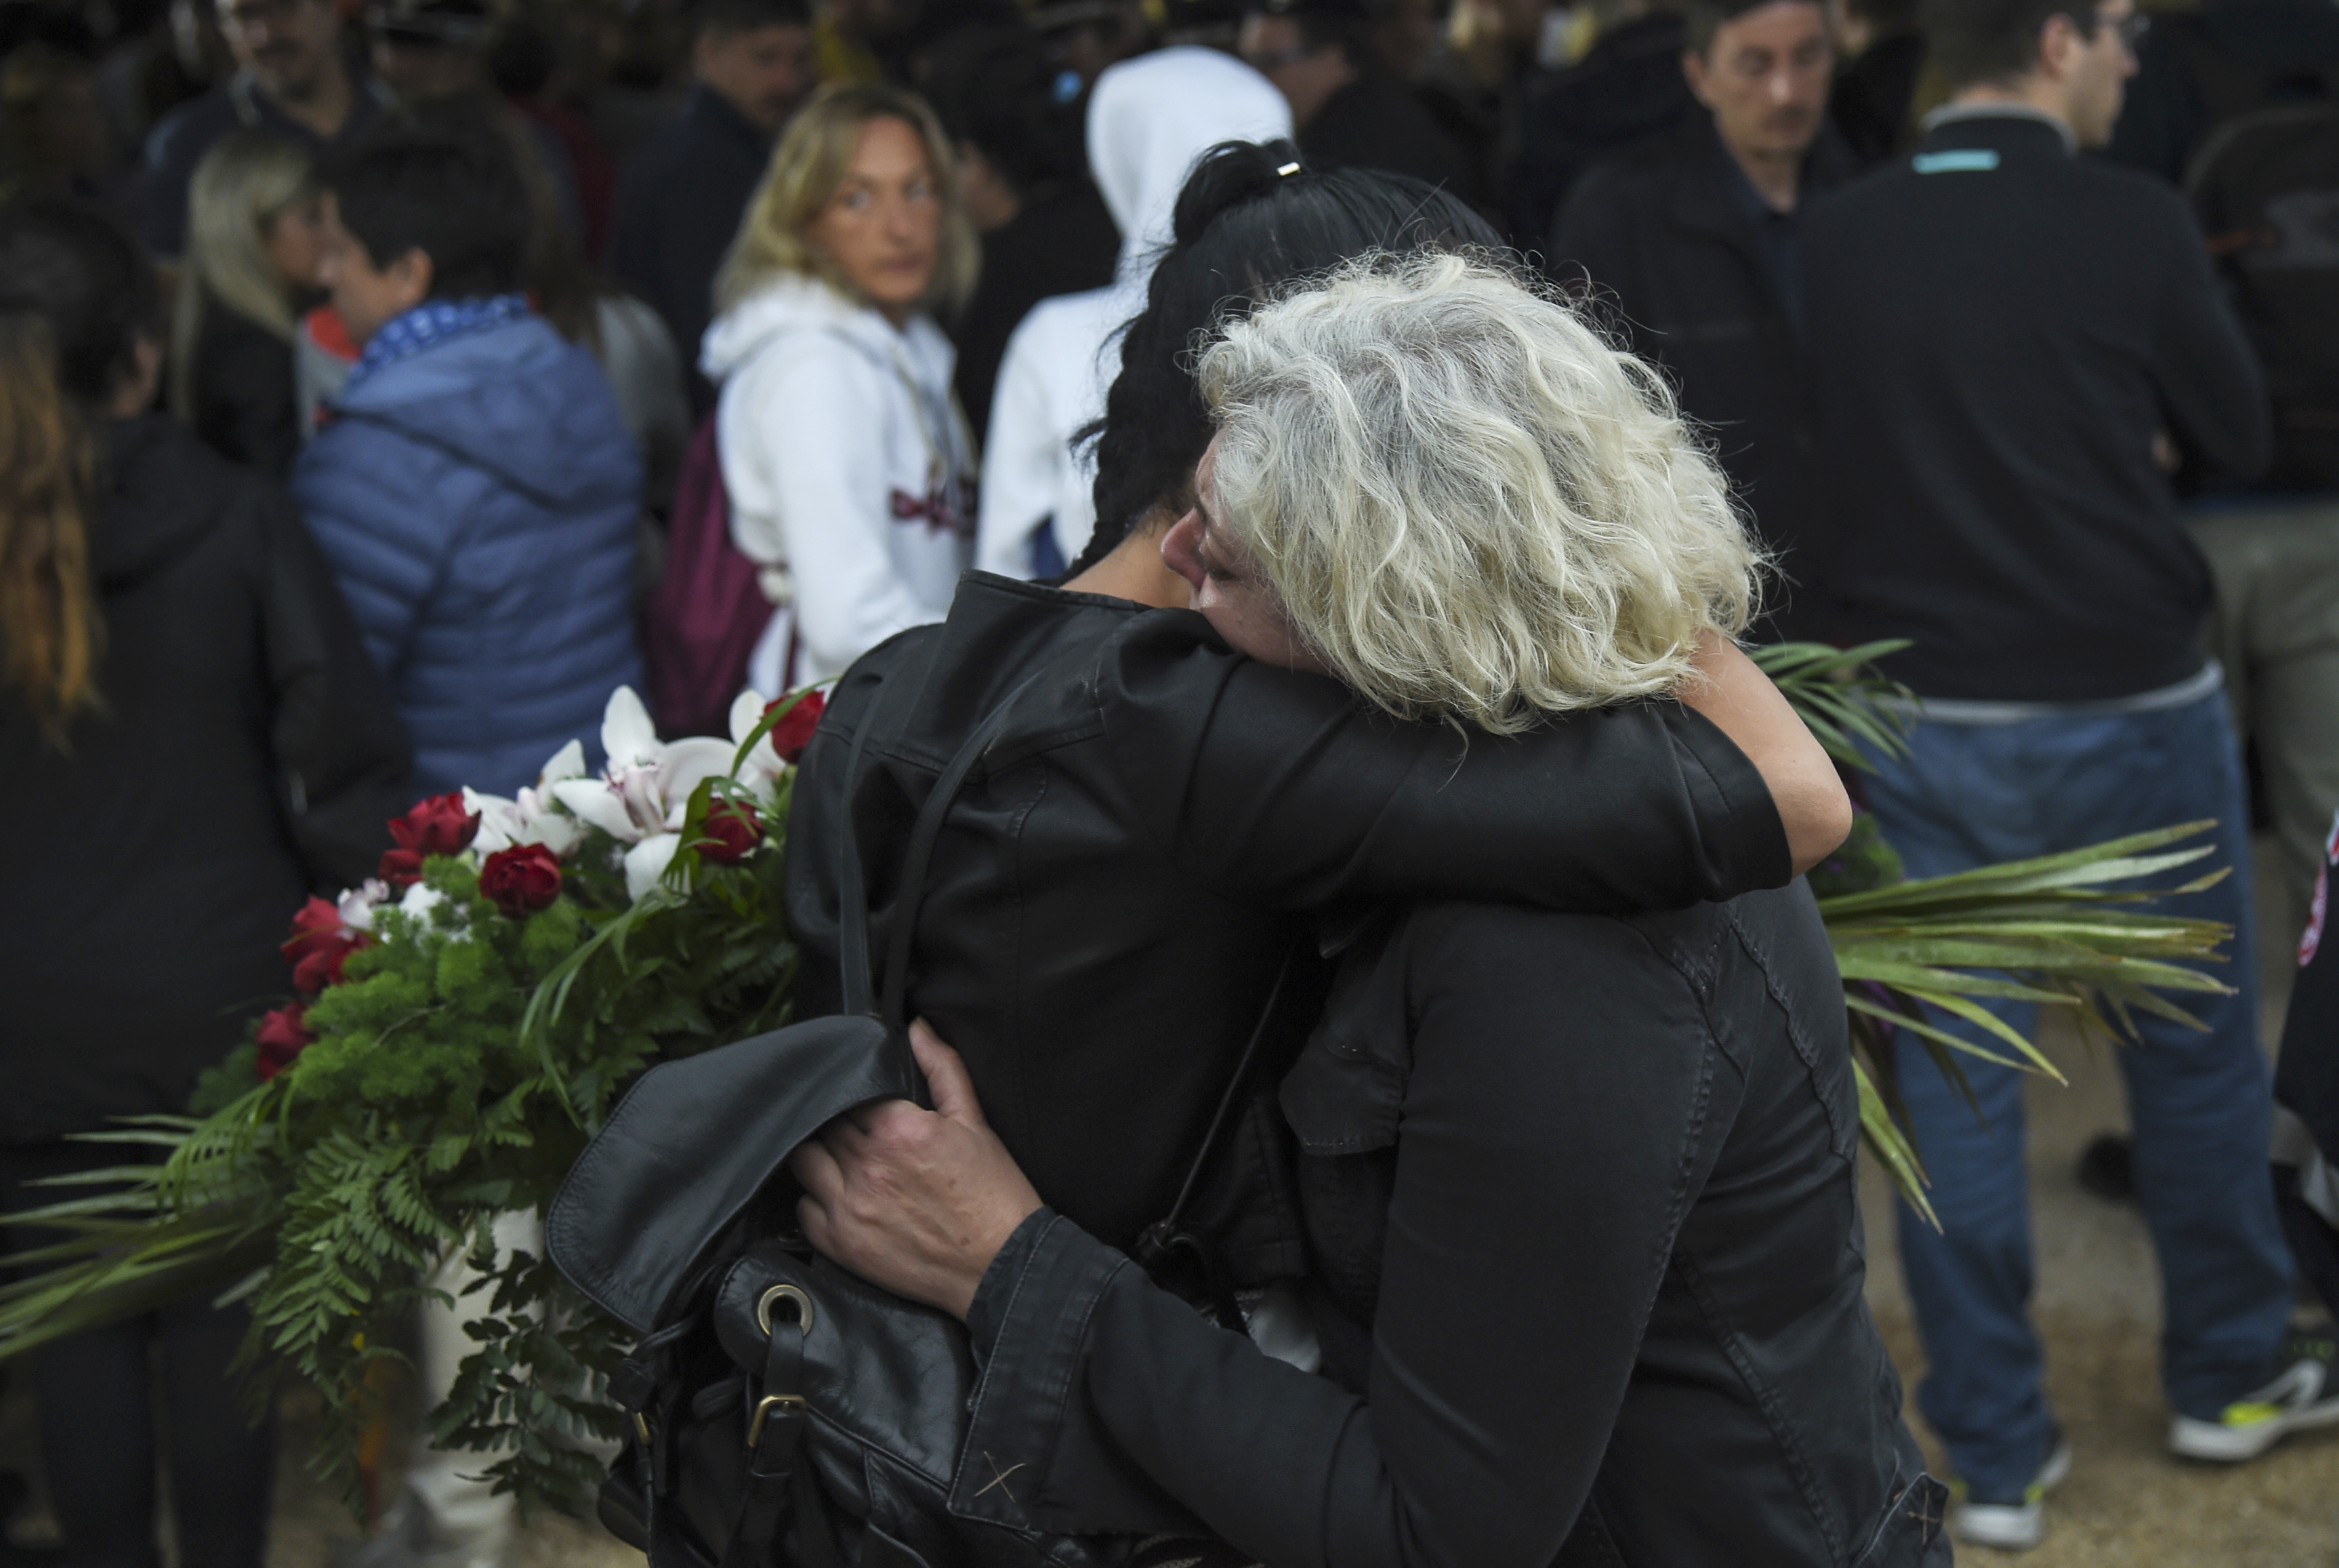 Relatives mourn during a funeral service for victims of the recent earthquake in Amatrice, central Italy, on August 30, 2016. The deadly earthquake brought devastation on August 26 to a string of mountain villages in a remote area straddling the Umbria, Marche and Lazio regions. Nearly 300 people died in the quake and hundreds more were injured, and although rescue efforts were winding down, officials warned it was feasible there are still a dozen or so bodies under the rubble. / AFP PHOTO / ANDREAS SOLARO